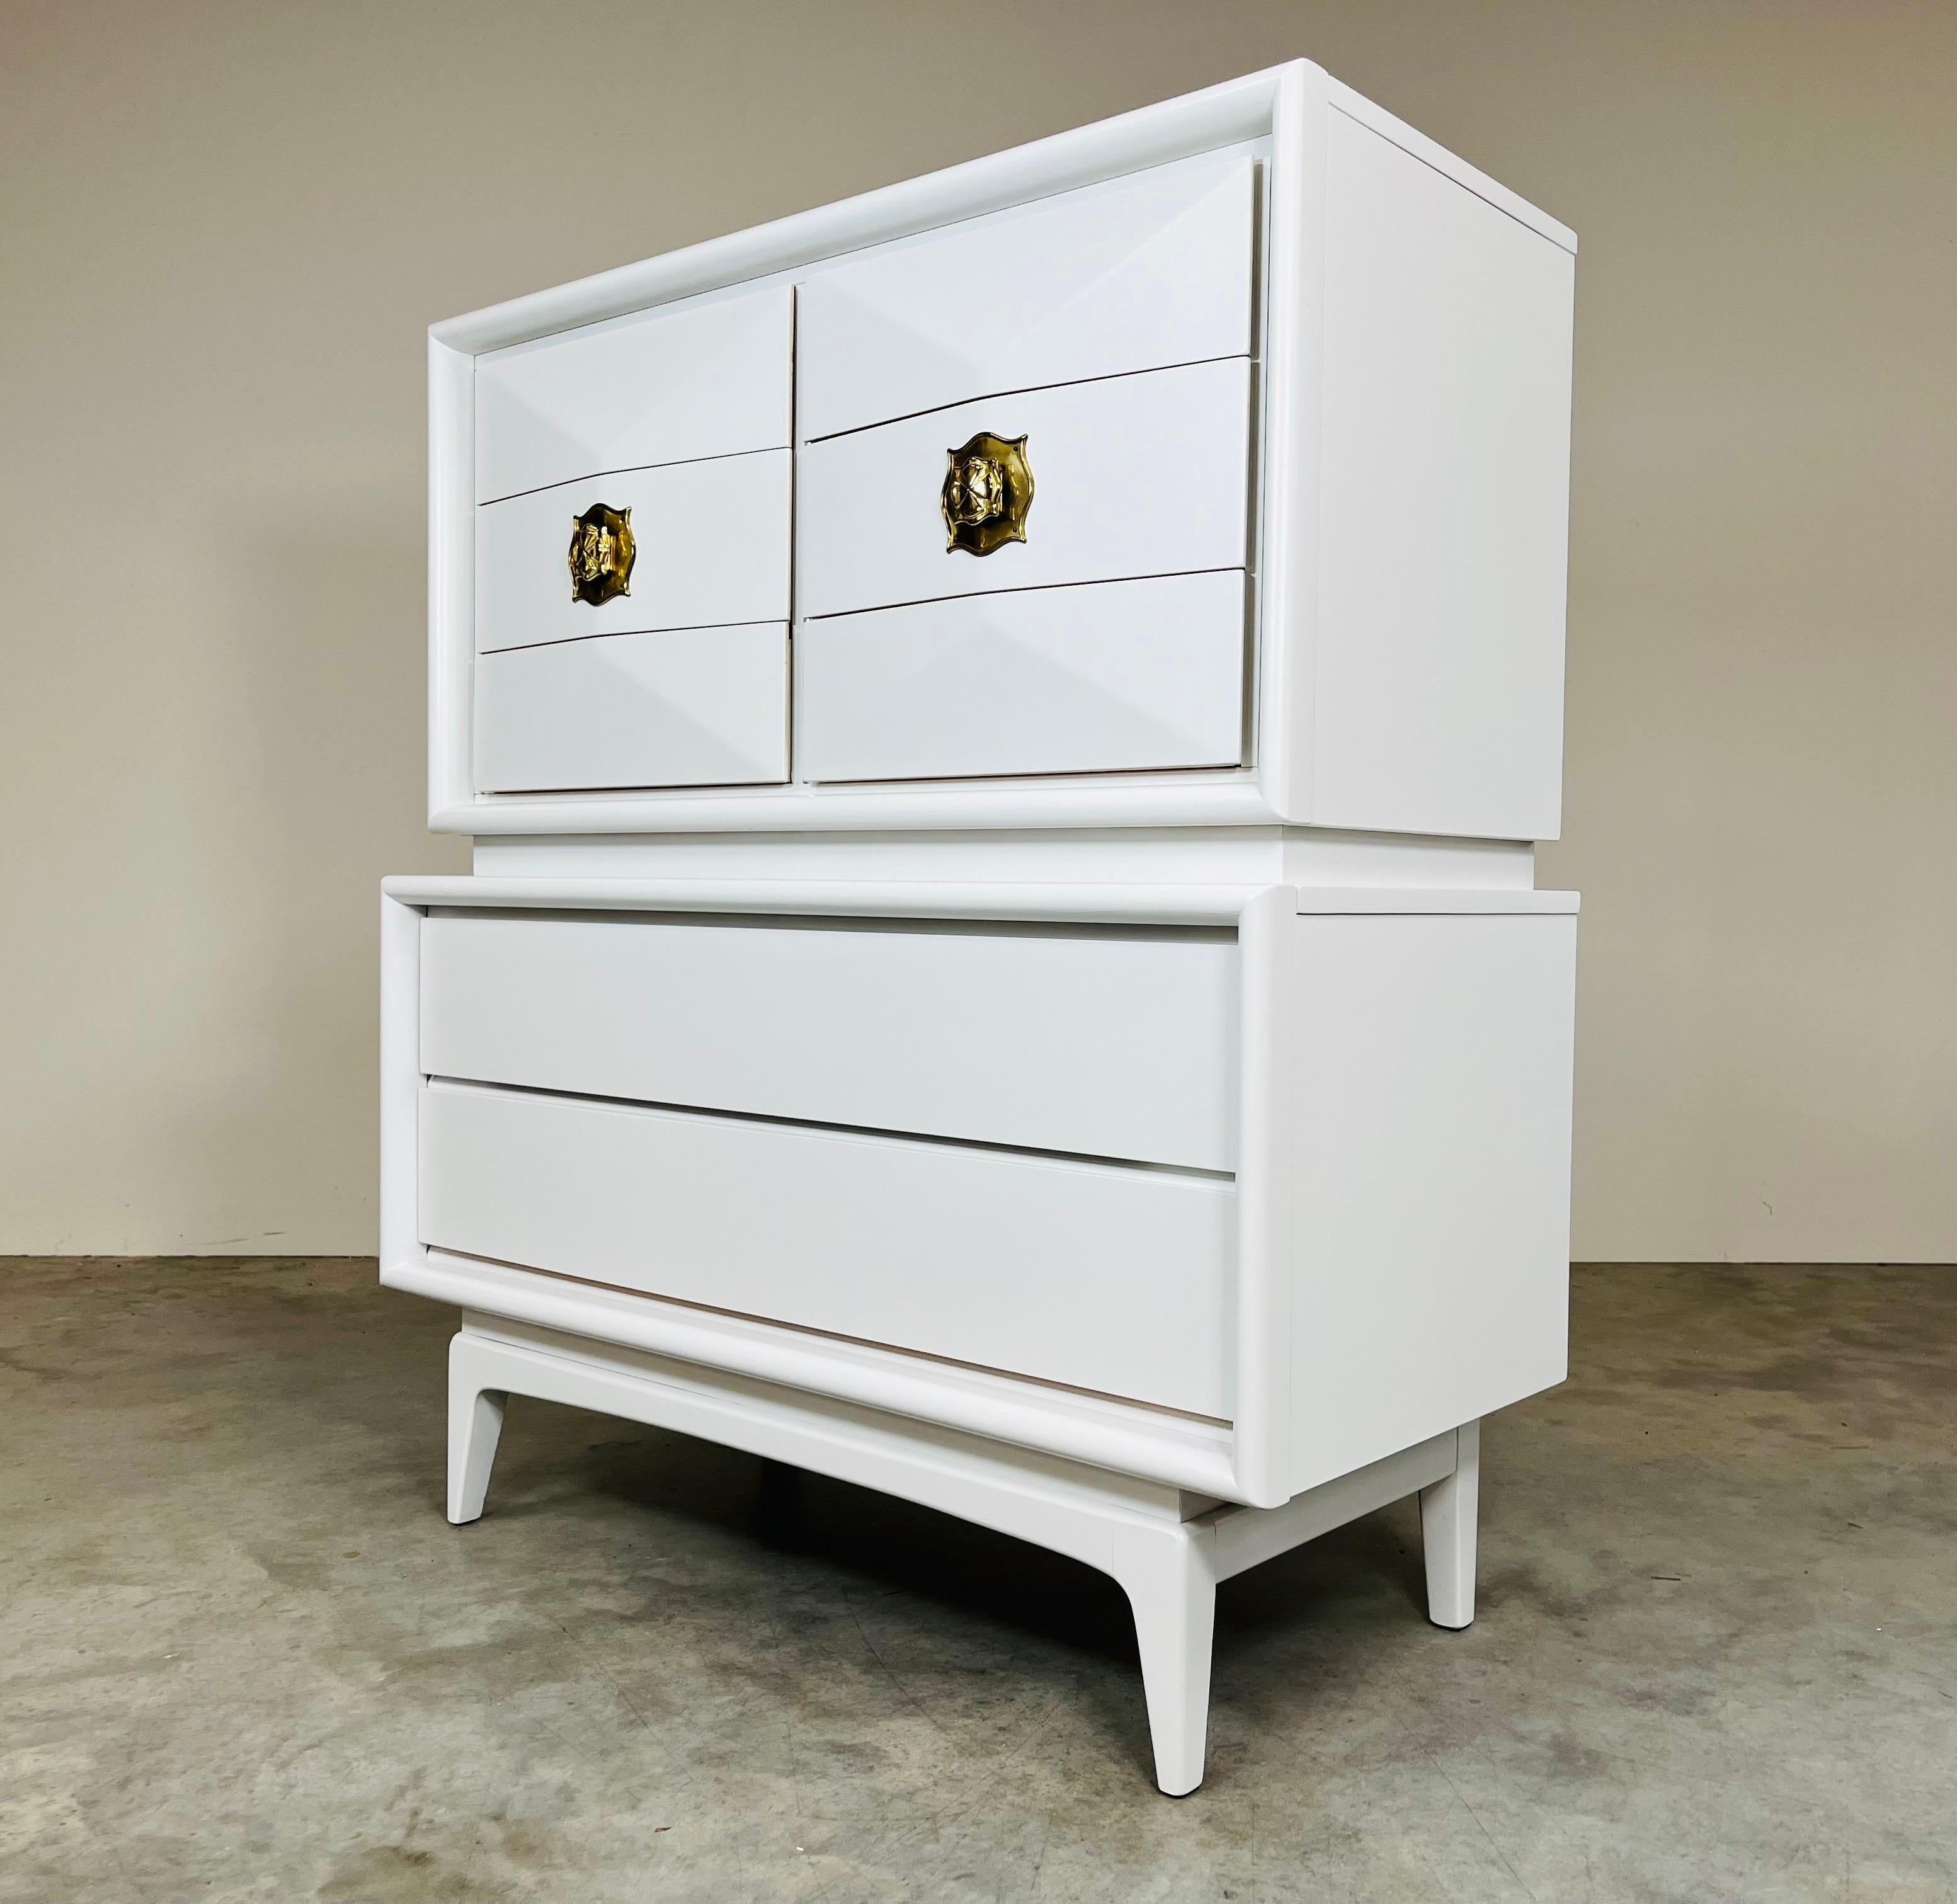 A stunning mid-century modern 8-drawer gentleman’s chest having sculptural convex diamond front top drawers with brass pulls and 2 flat wide bottom drawers raised on a base with four tapered legs.
In outstanding vintage condition. Cleaned and ready